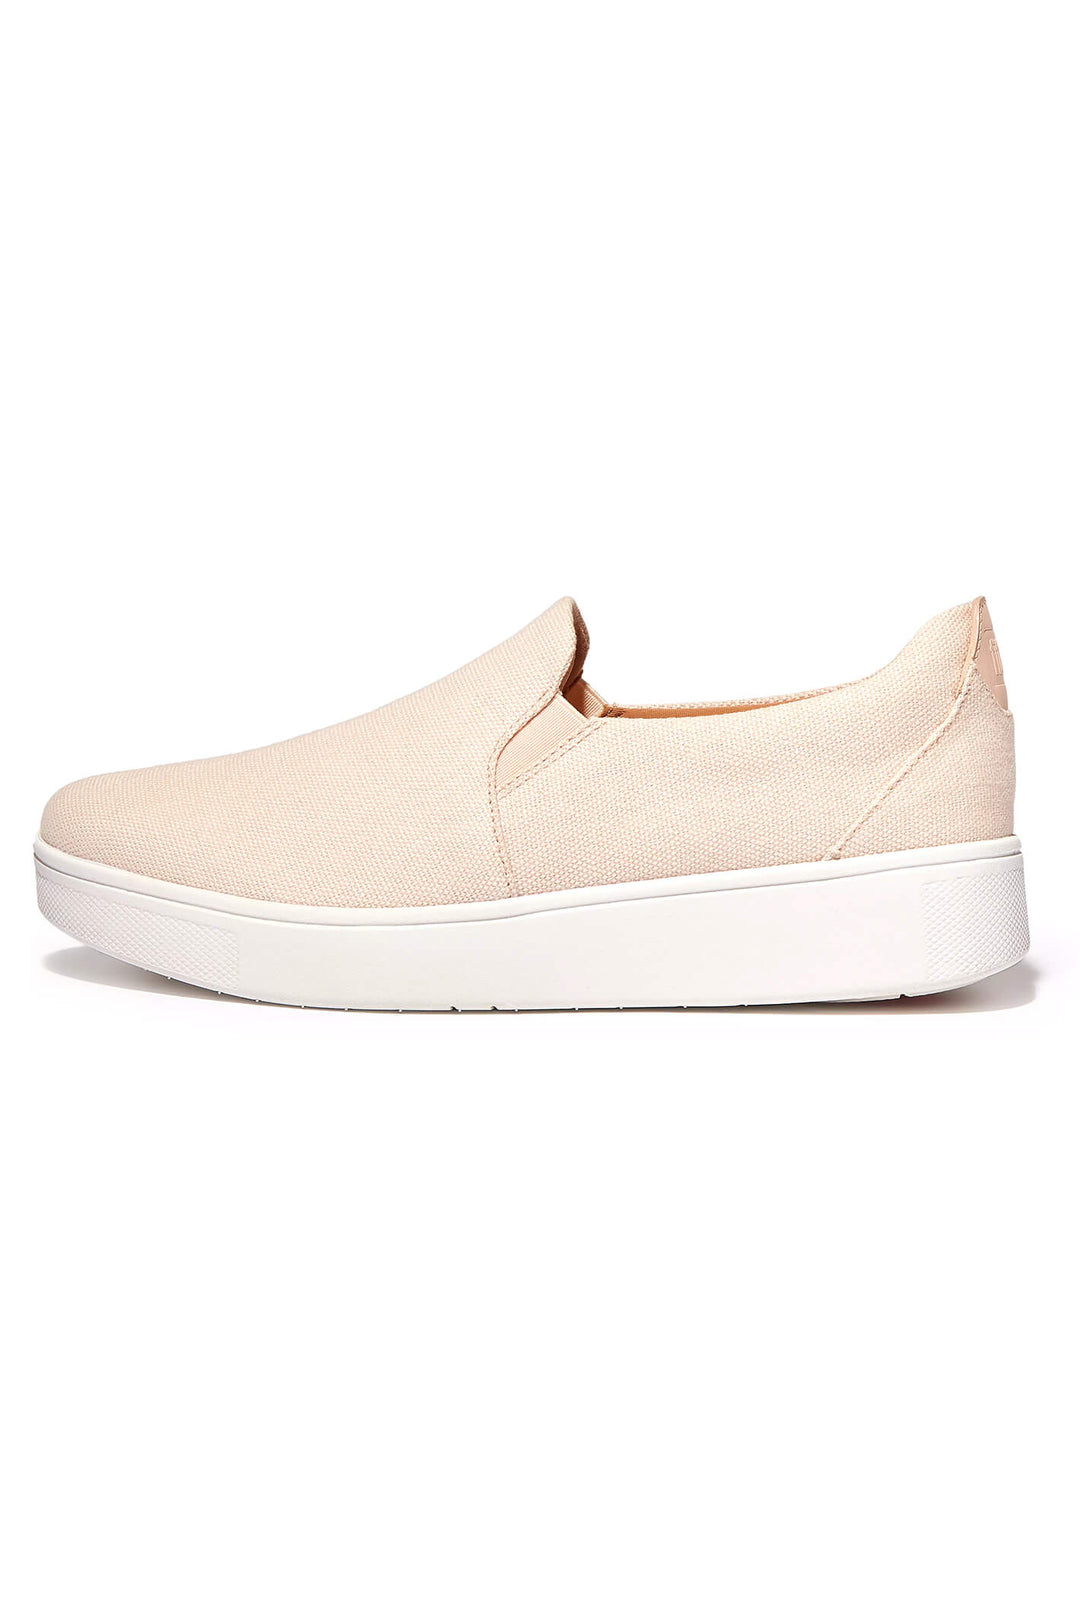 Fitflop Rally FY4-A41 Slip-On Skate Rose Trainer - Shirley Allum Boutique